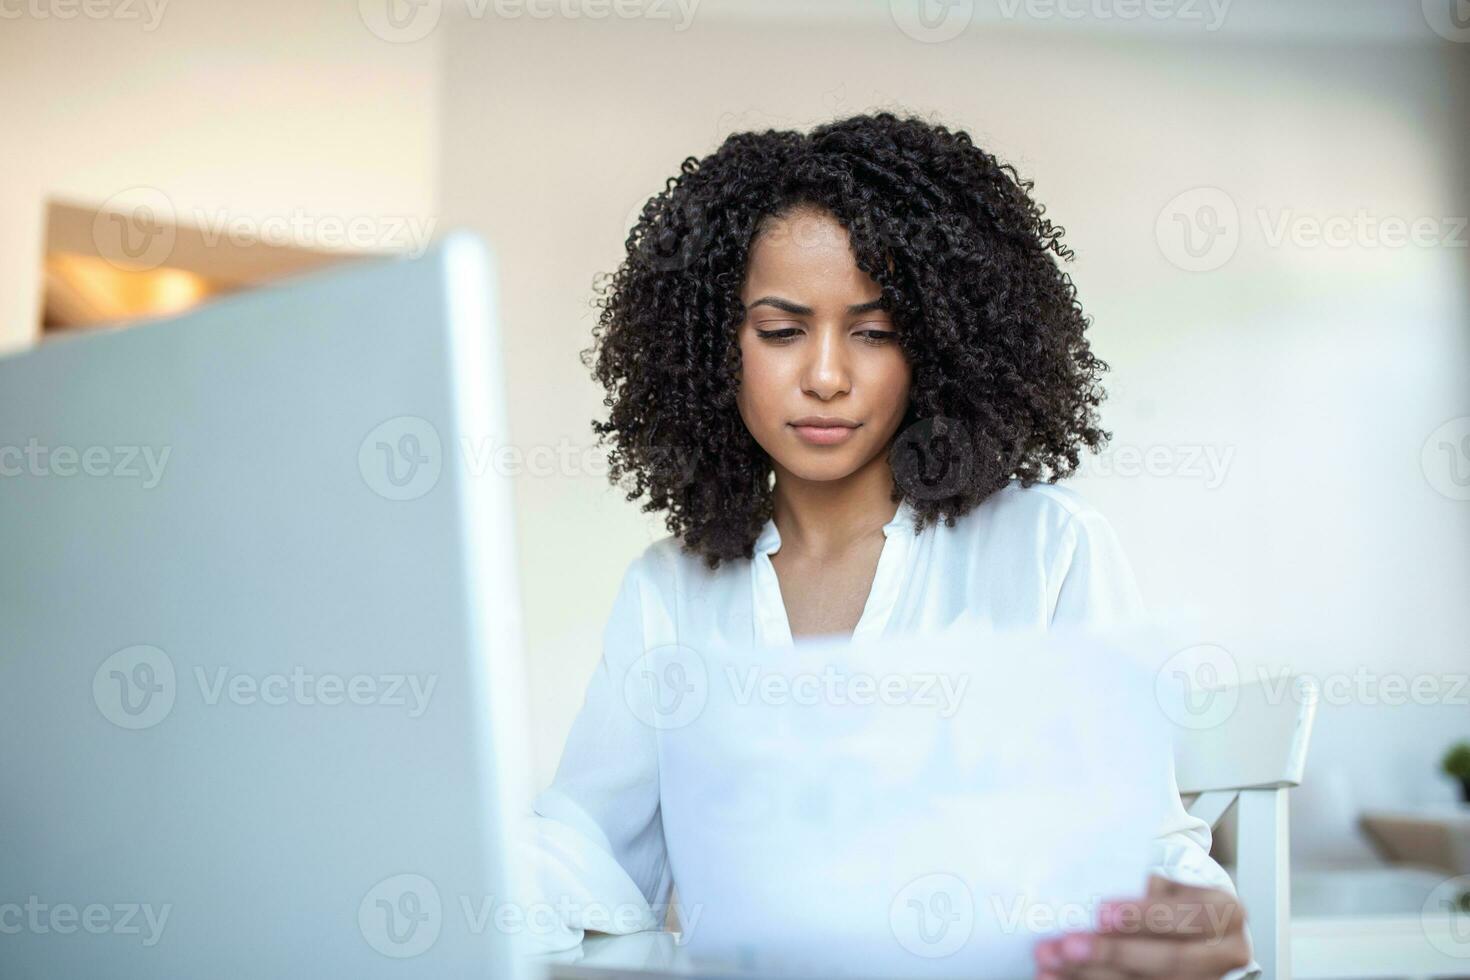 Business professionals. Business woman analyzing data using computer while spending time in the office. Beautiful young grinning professional Black woman in office. Graphs and charts photo